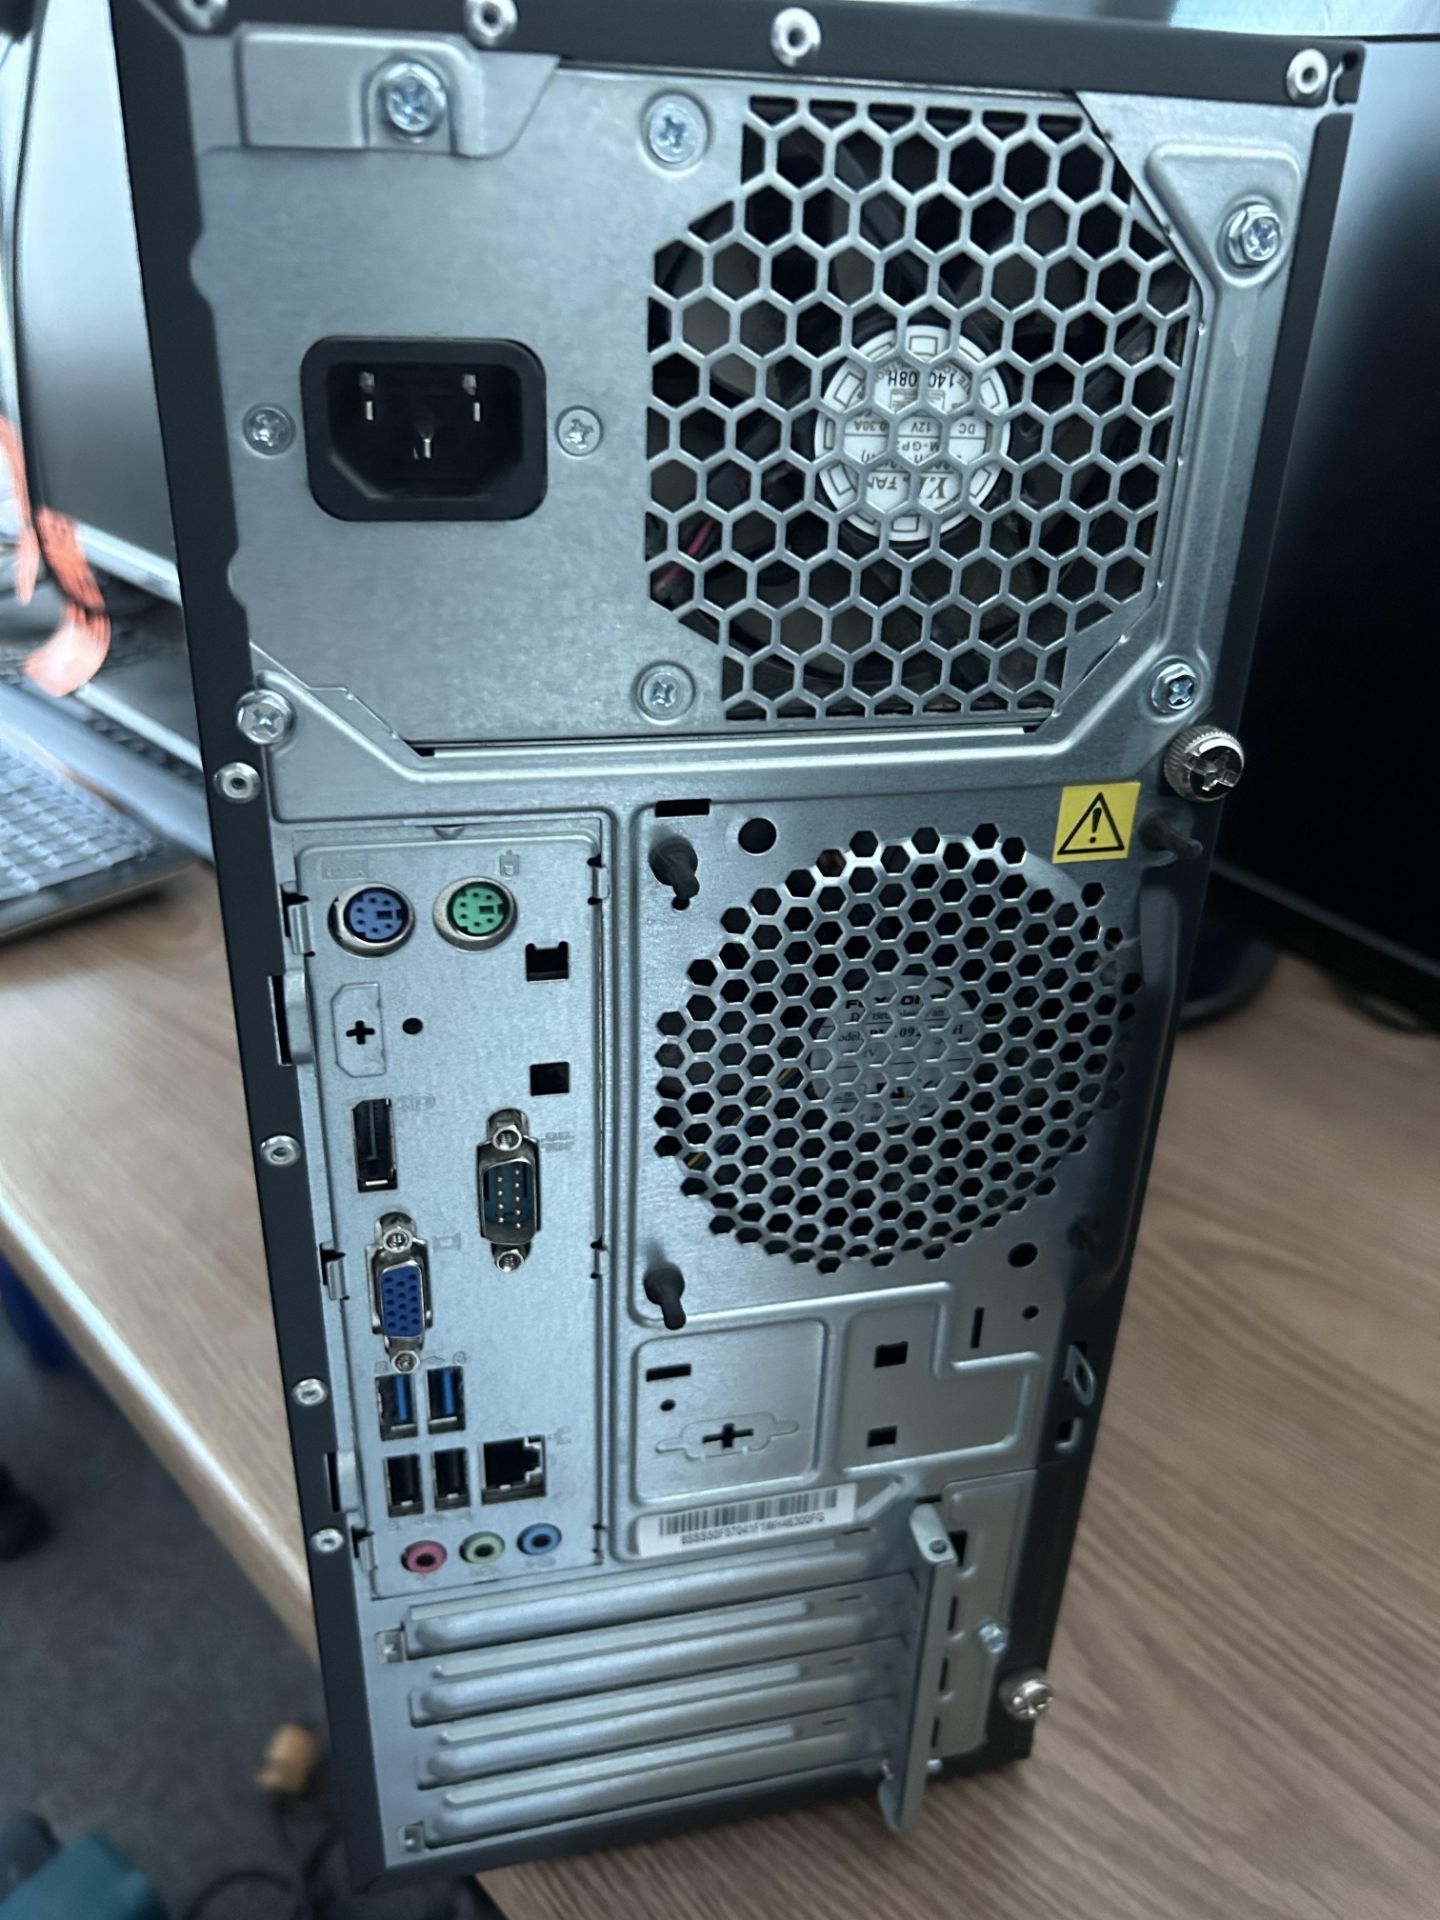 Lot of (1) THINKCENTRE Tower and (1) DELL Vostro 220 tower - Image 3 of 9